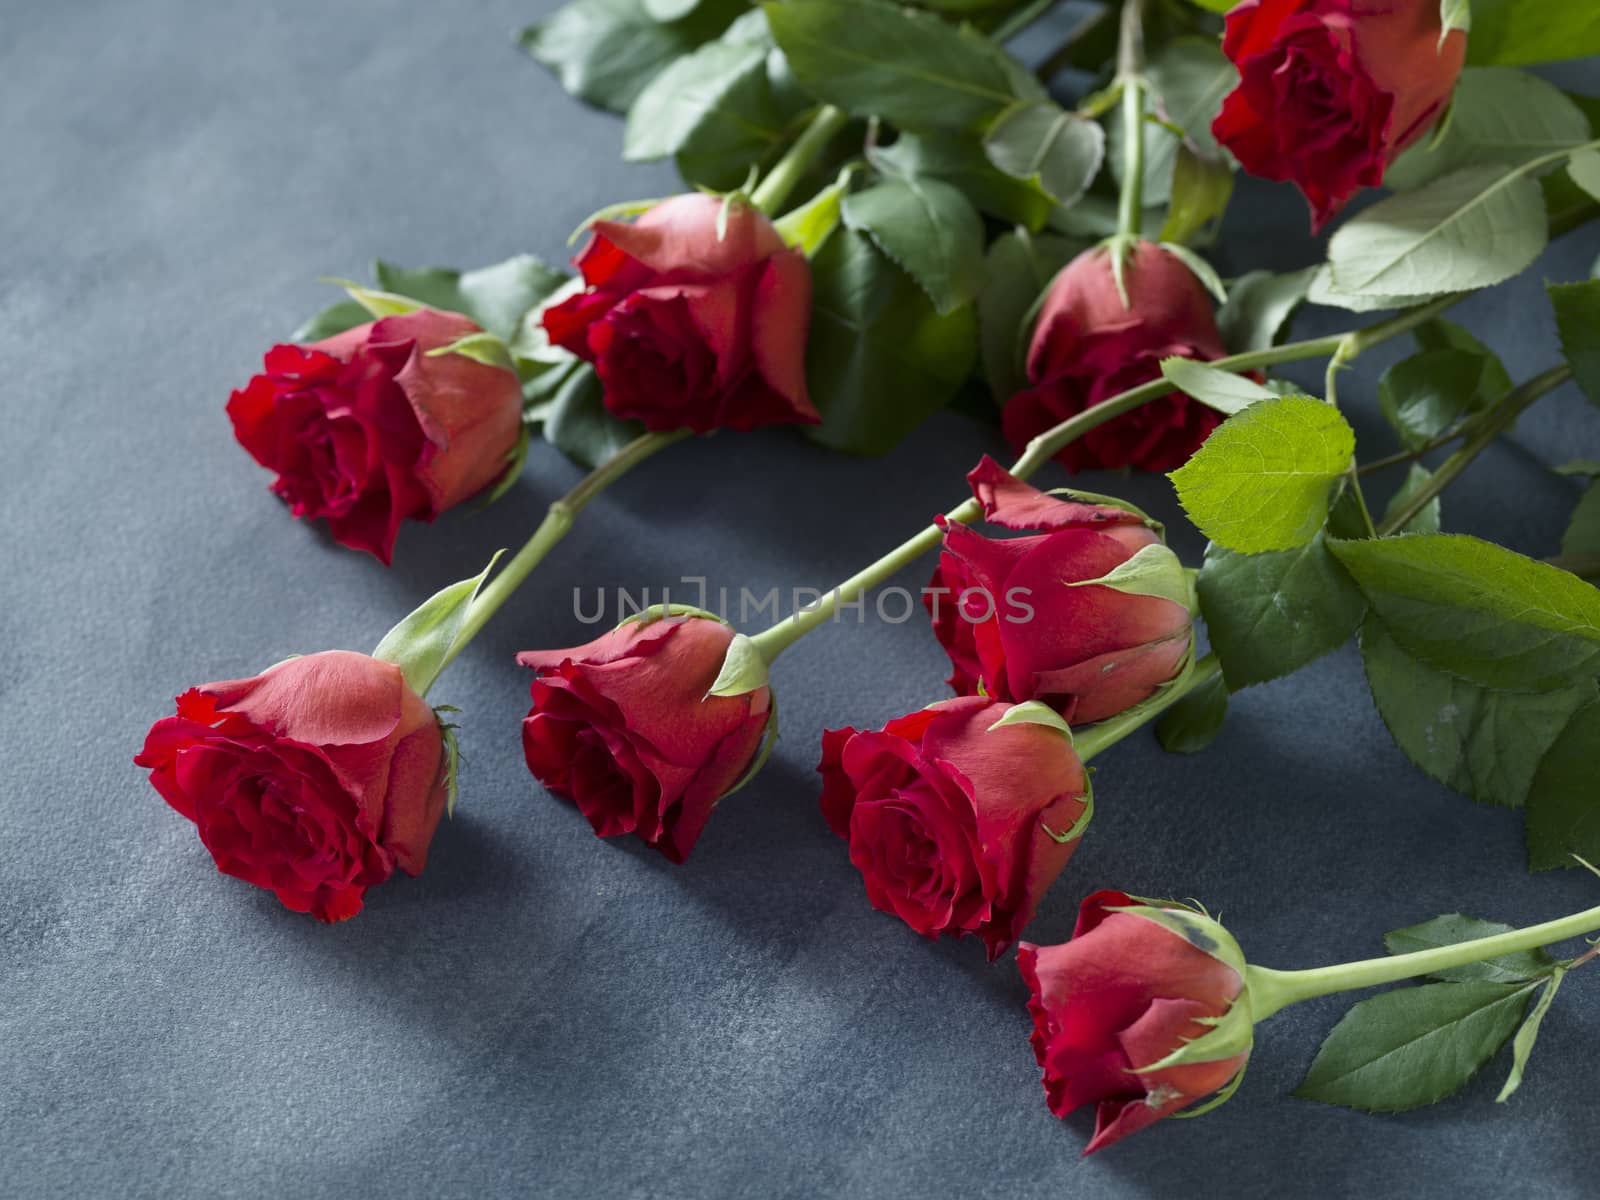 Greeting or wedding card with a bunch of red roses by janssenkruseproductions